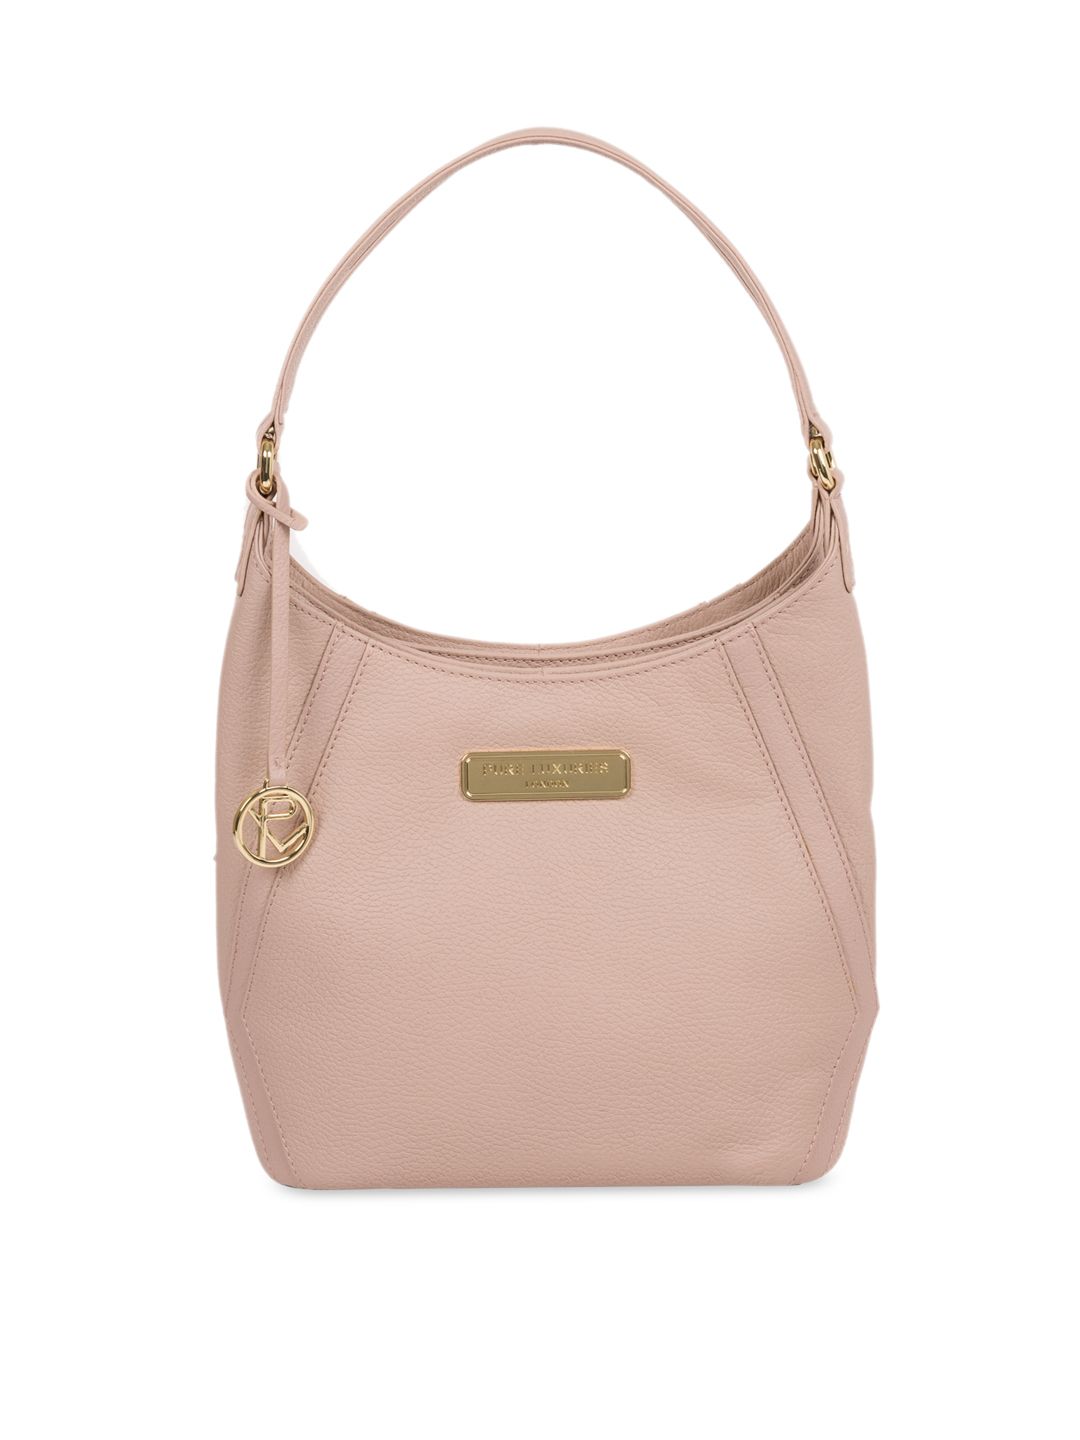 PURE LUXURIES LONDON Women Pink Solid Genuine Leather Abigail Tote Bag Price in India